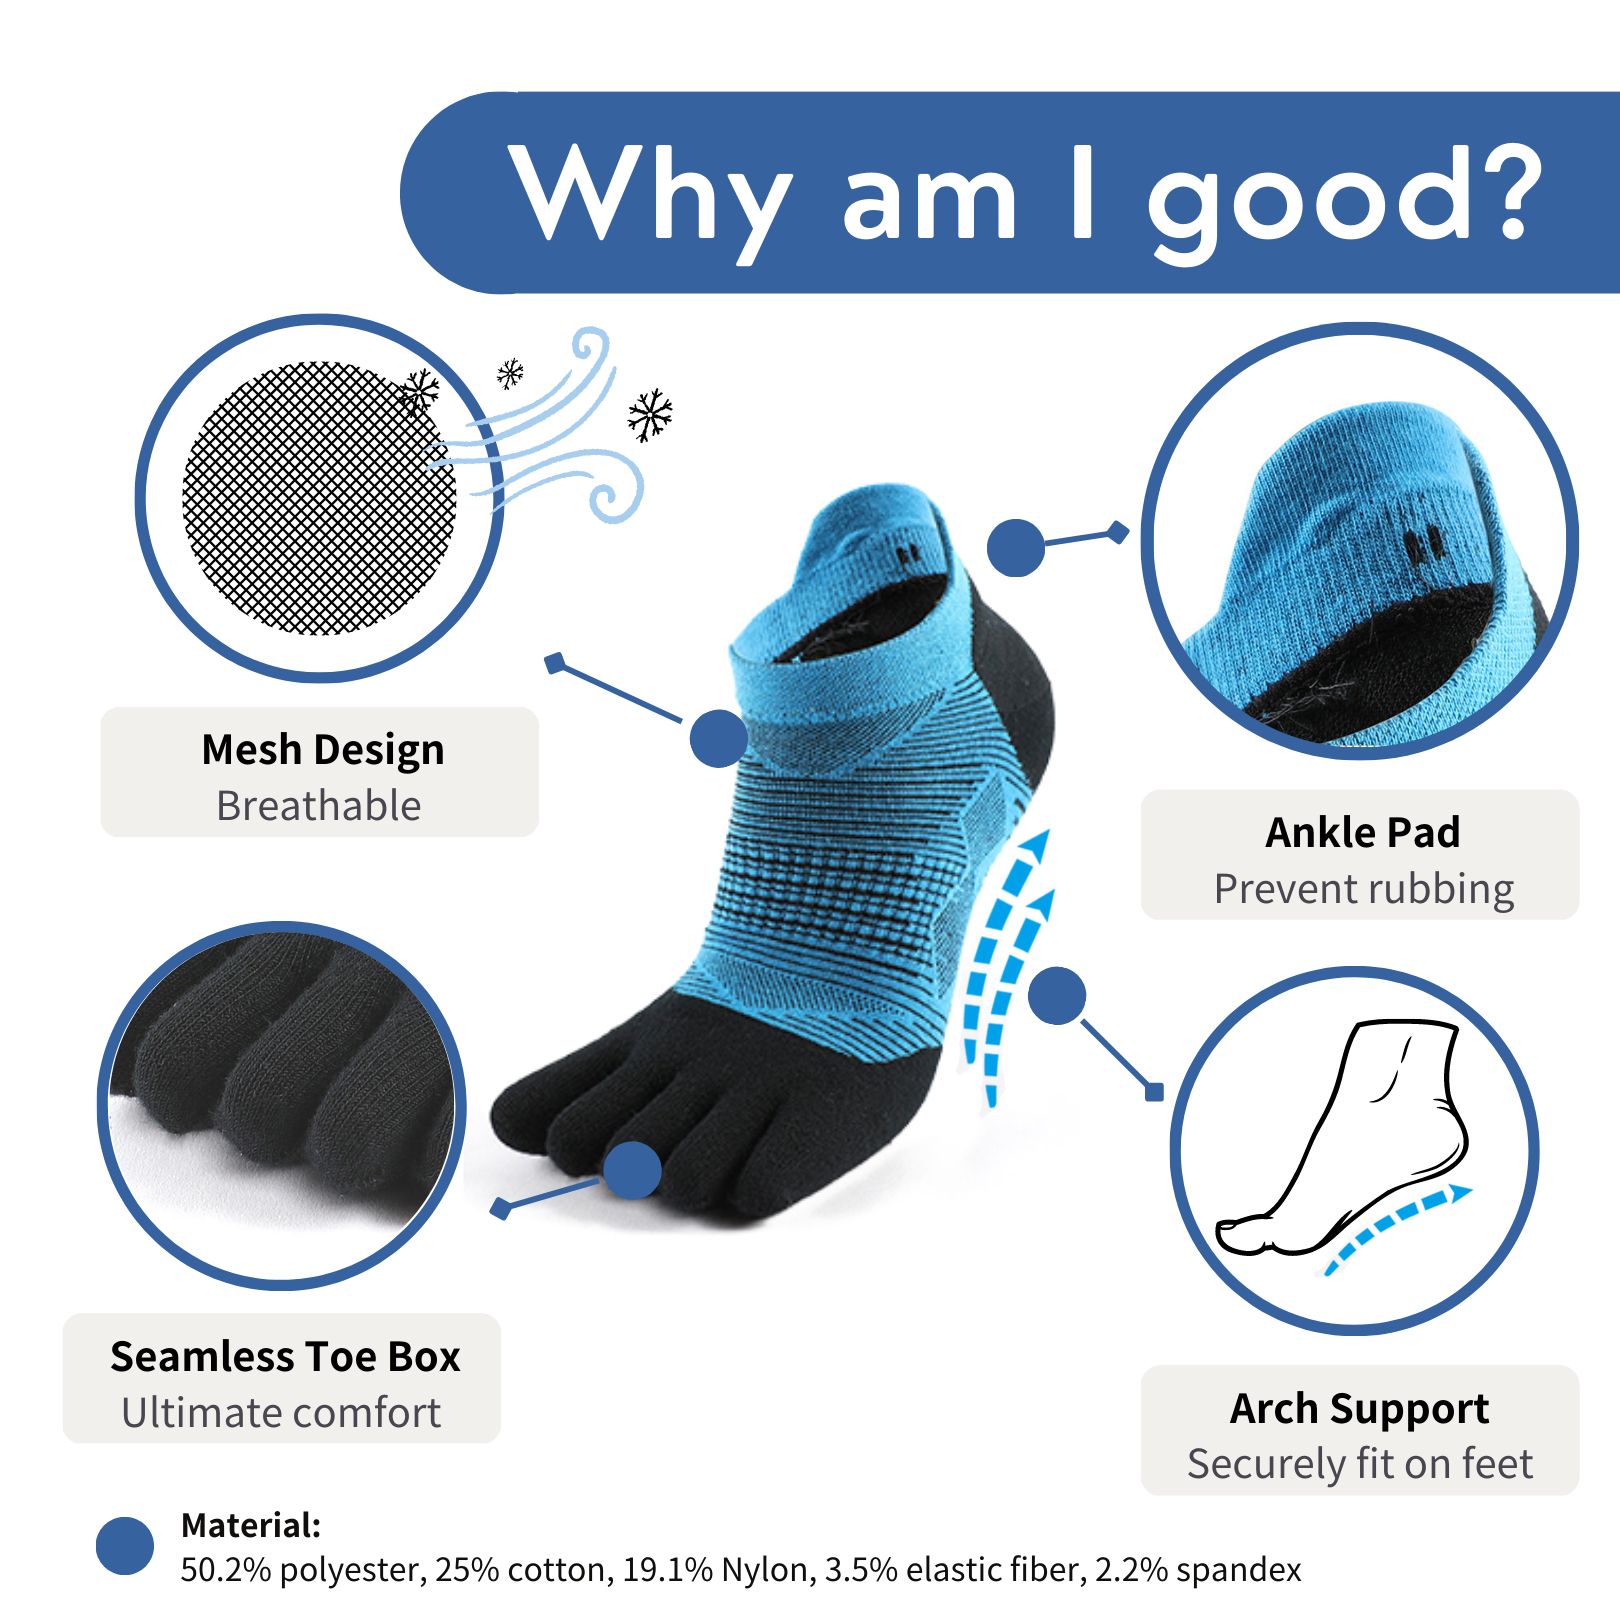 What Are Seamless Toe Socks? – Goodly